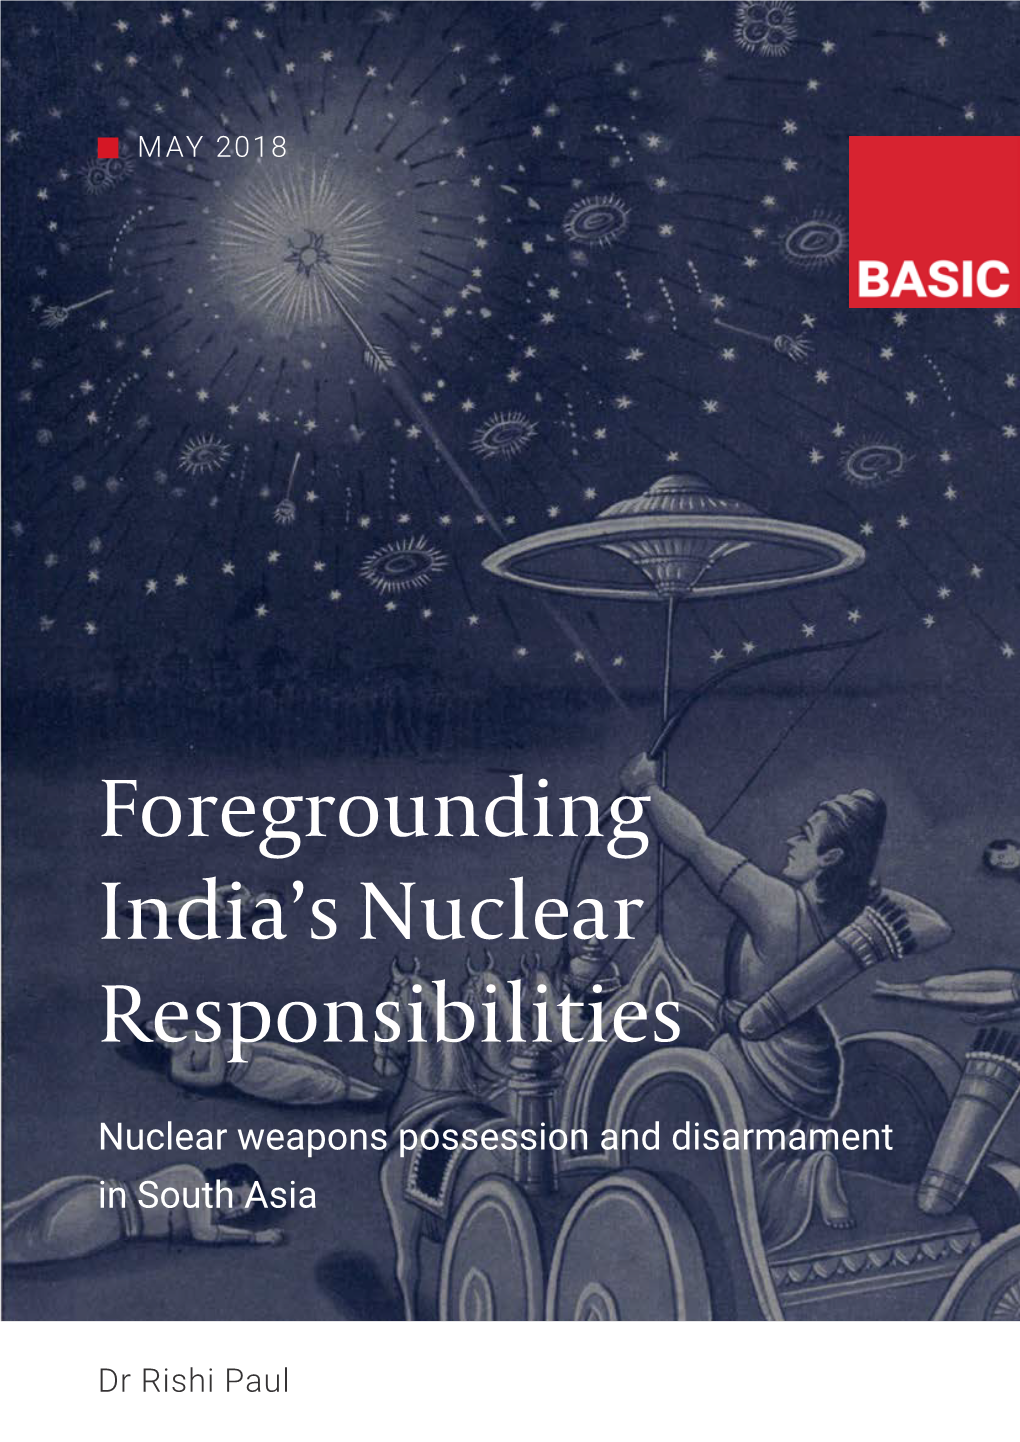 Foregrounding India's Nuclear Responsibilities